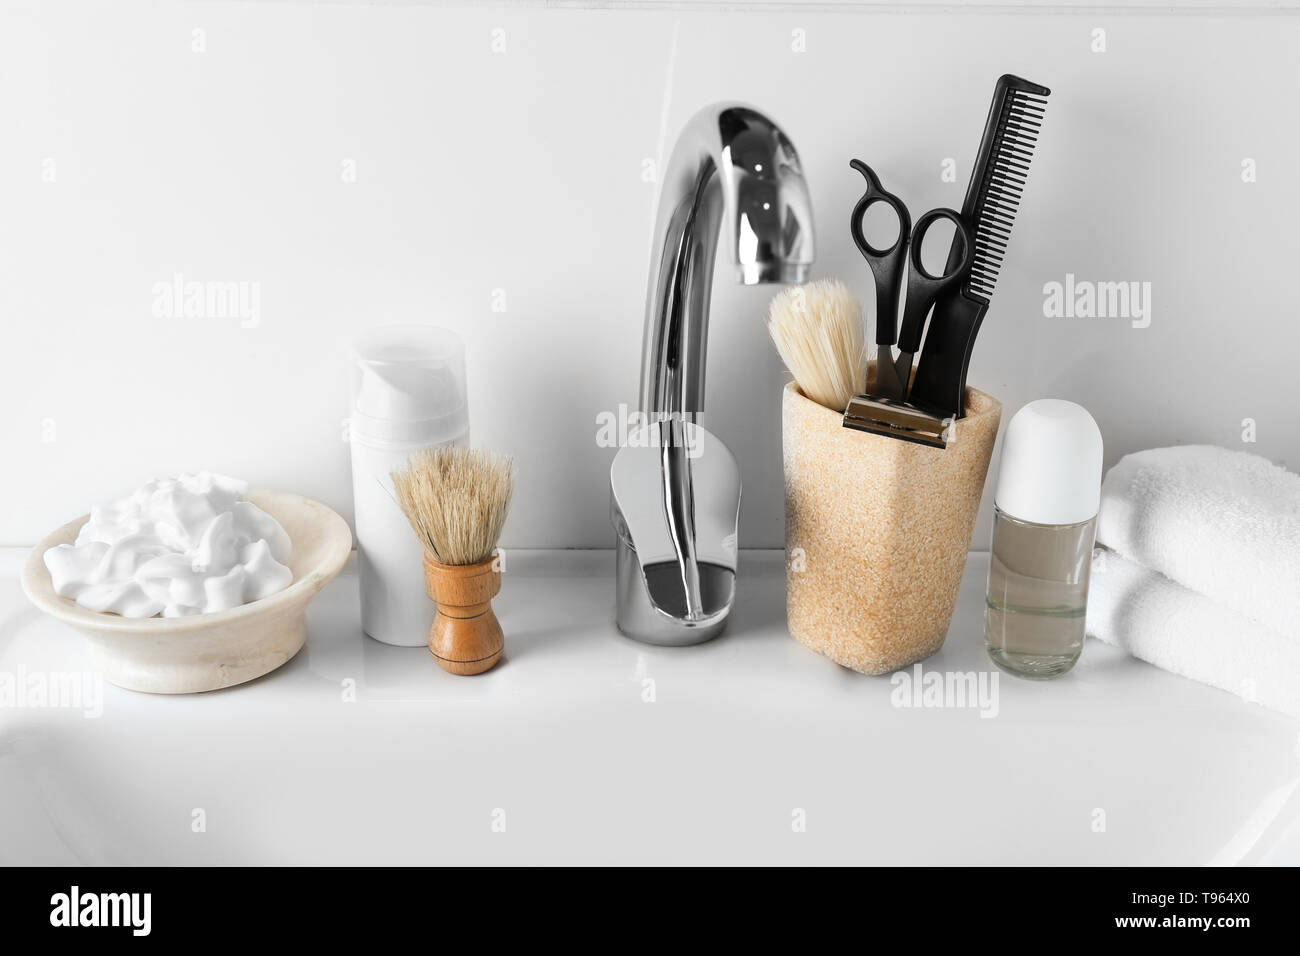 Shaving accessories with cosmetics for men on sink in bathroom Stock Photo